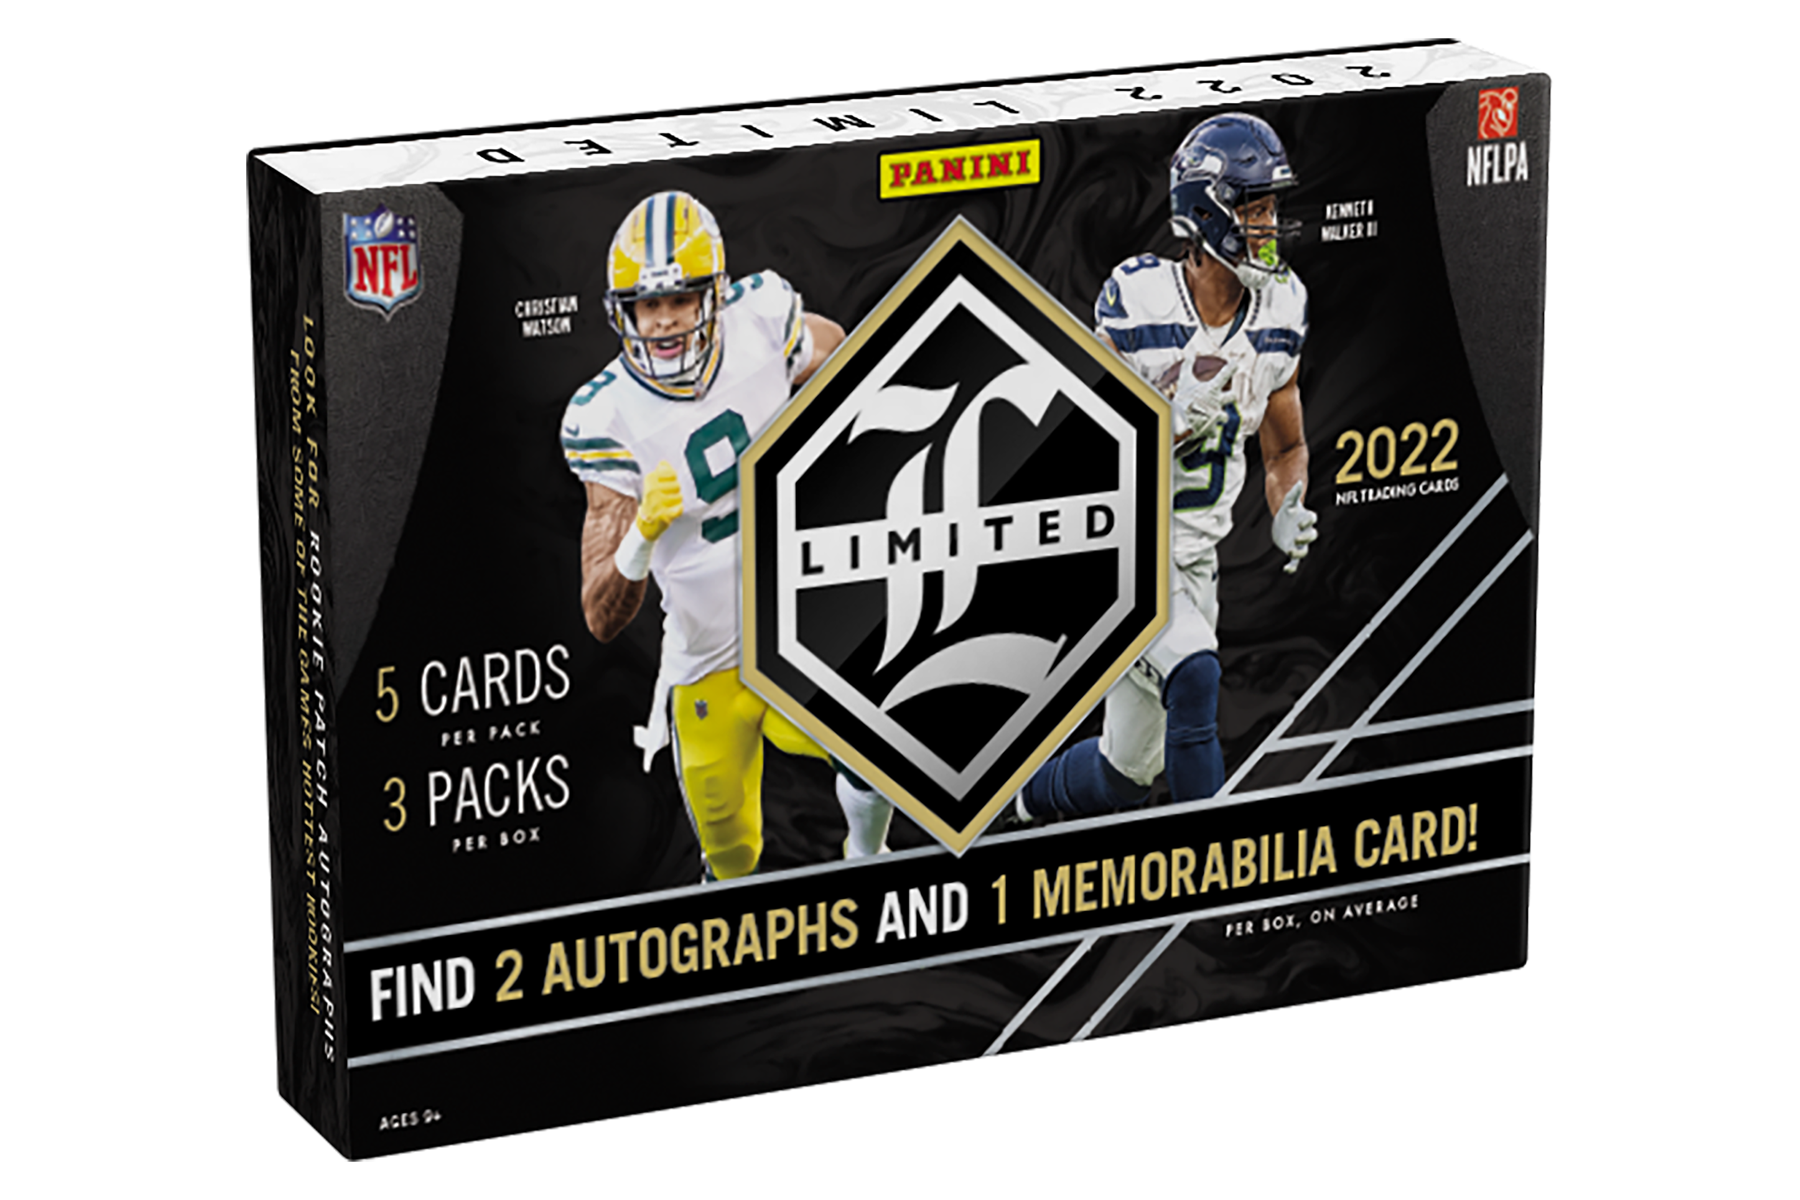 2022 Leaf Autographed Football Jersey Set Info, Boxes, Checklist, Date